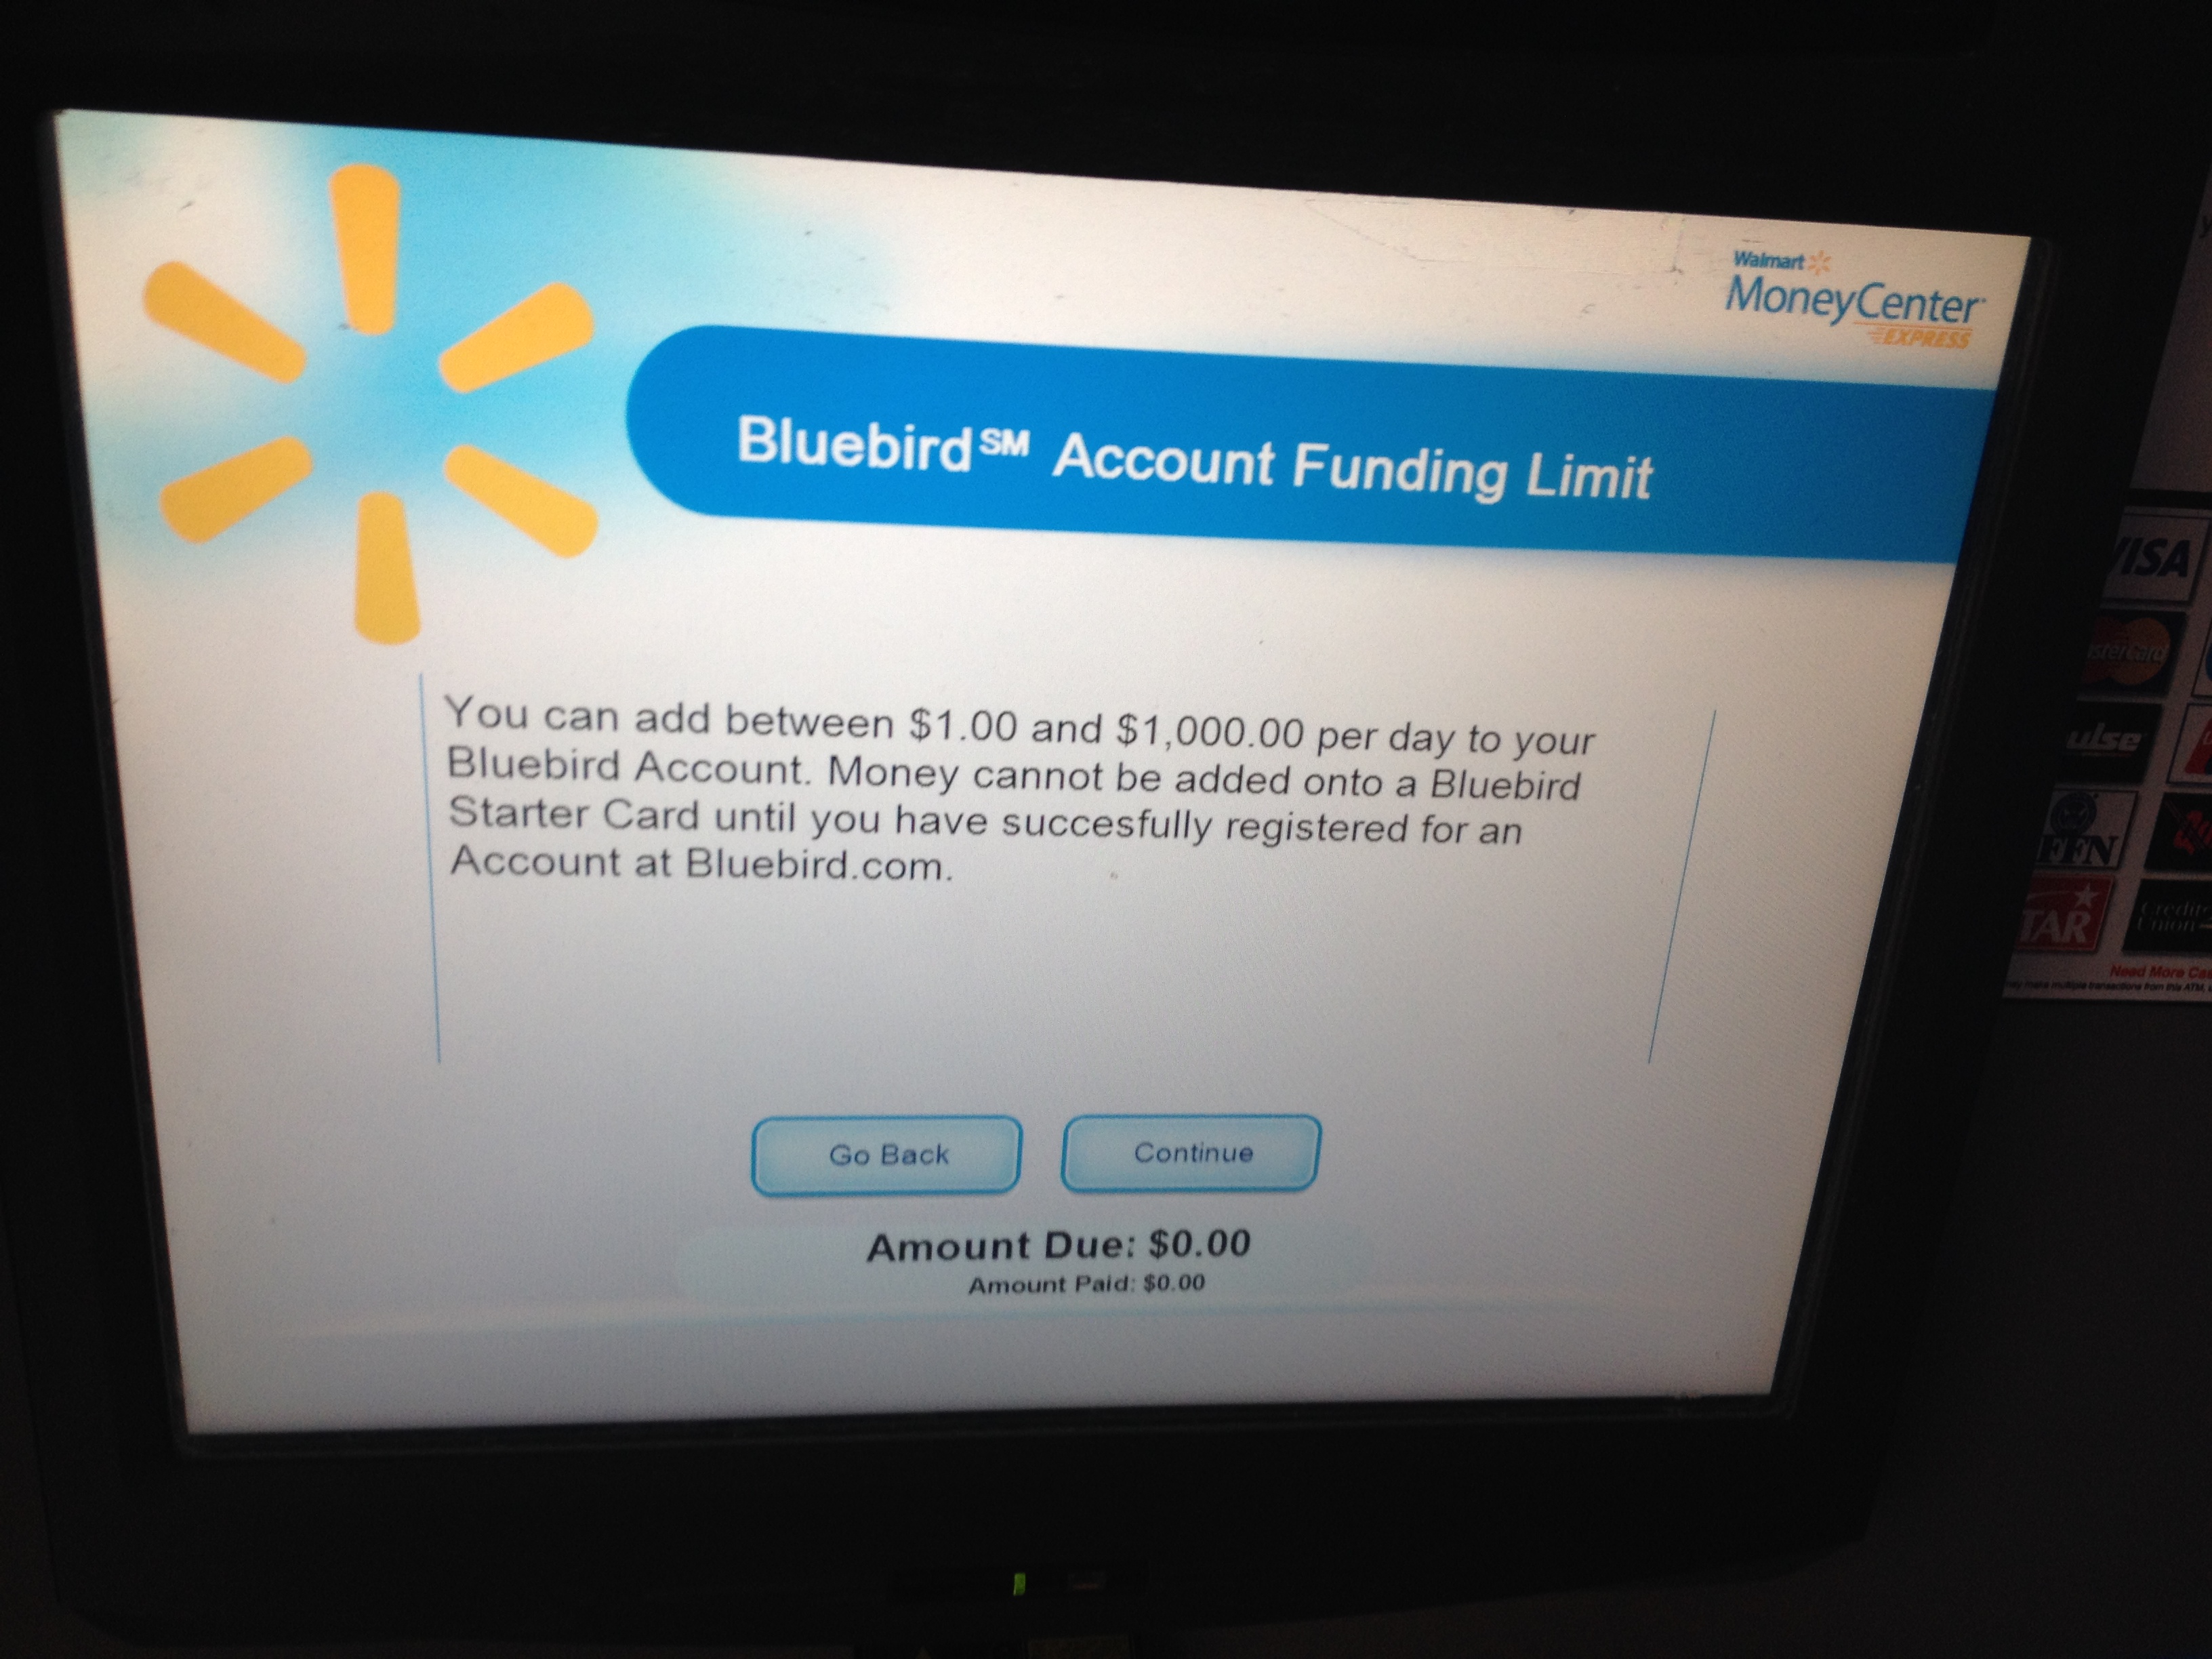 What is a Bluebird card, and is there a monthly fee to use it?